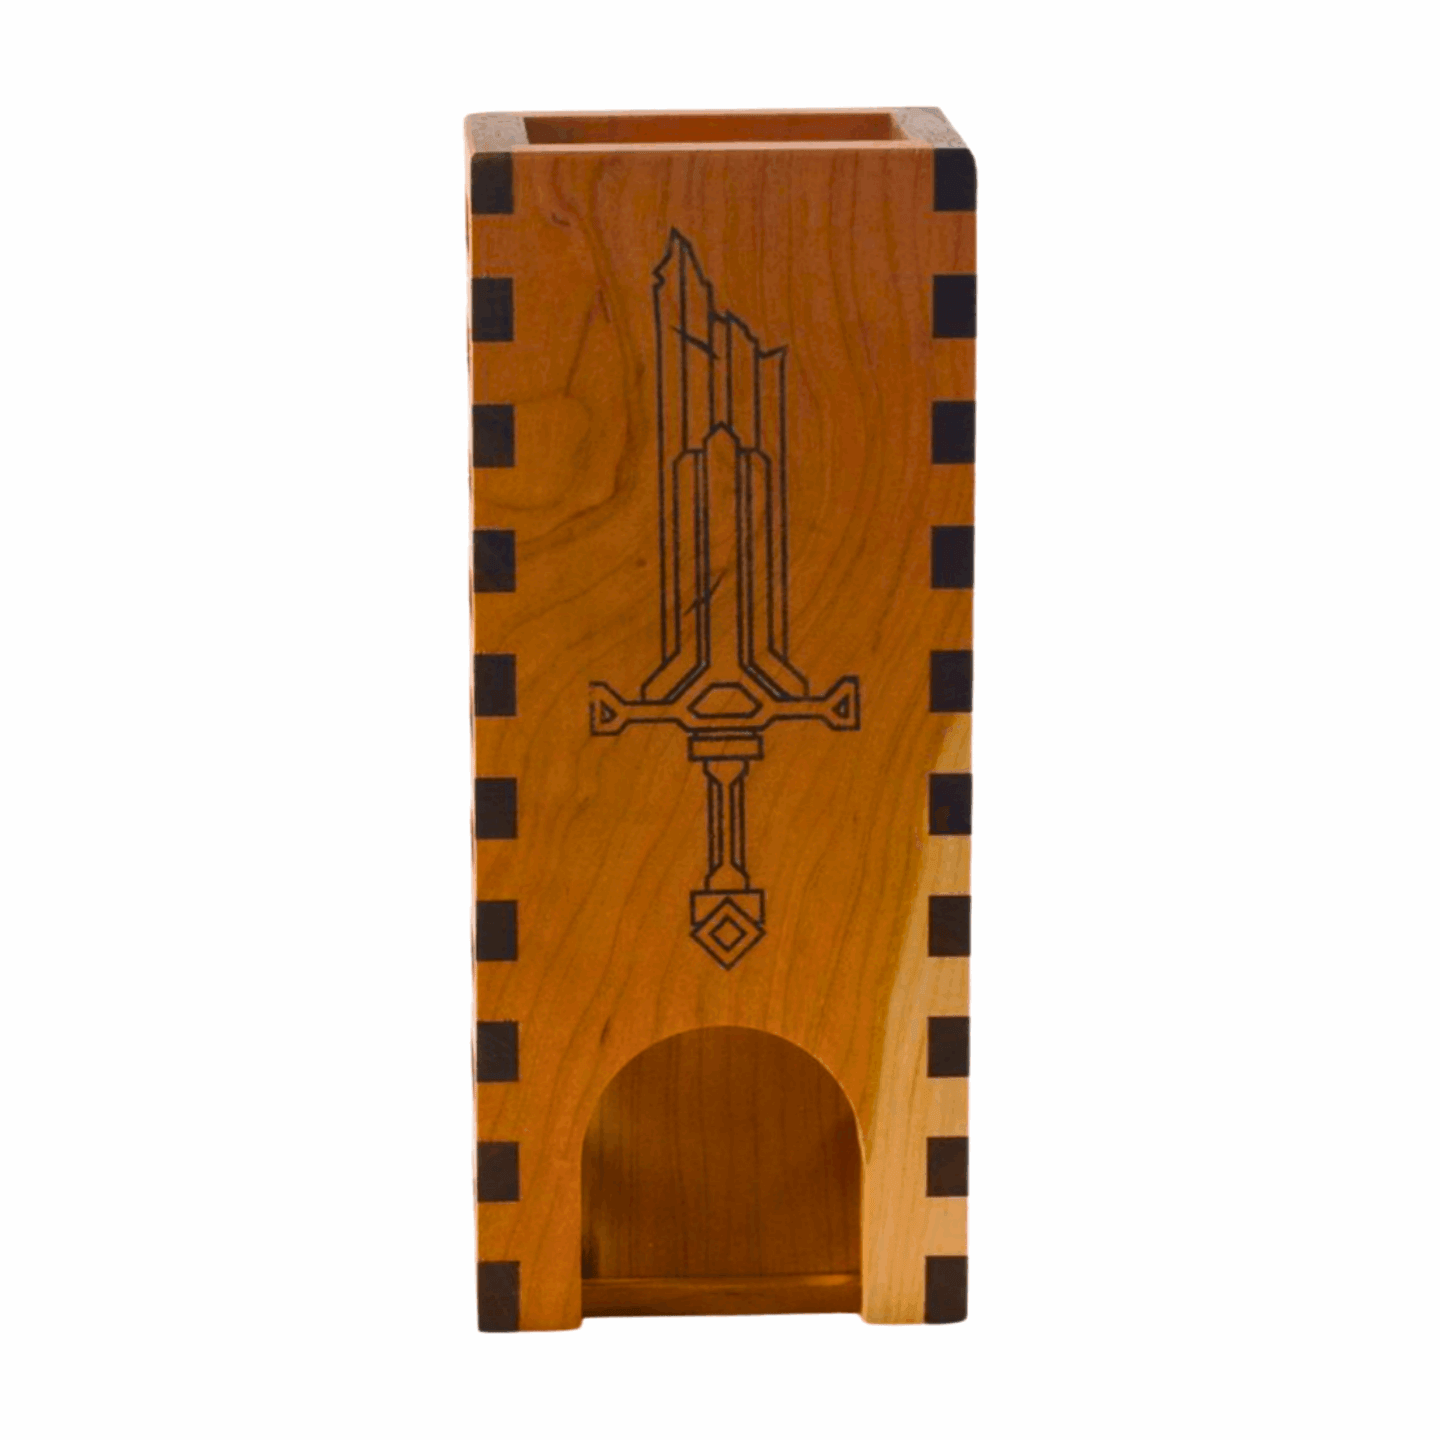 Wooden Dice Roller with Slatted Sides and Broken Sword Image Front View